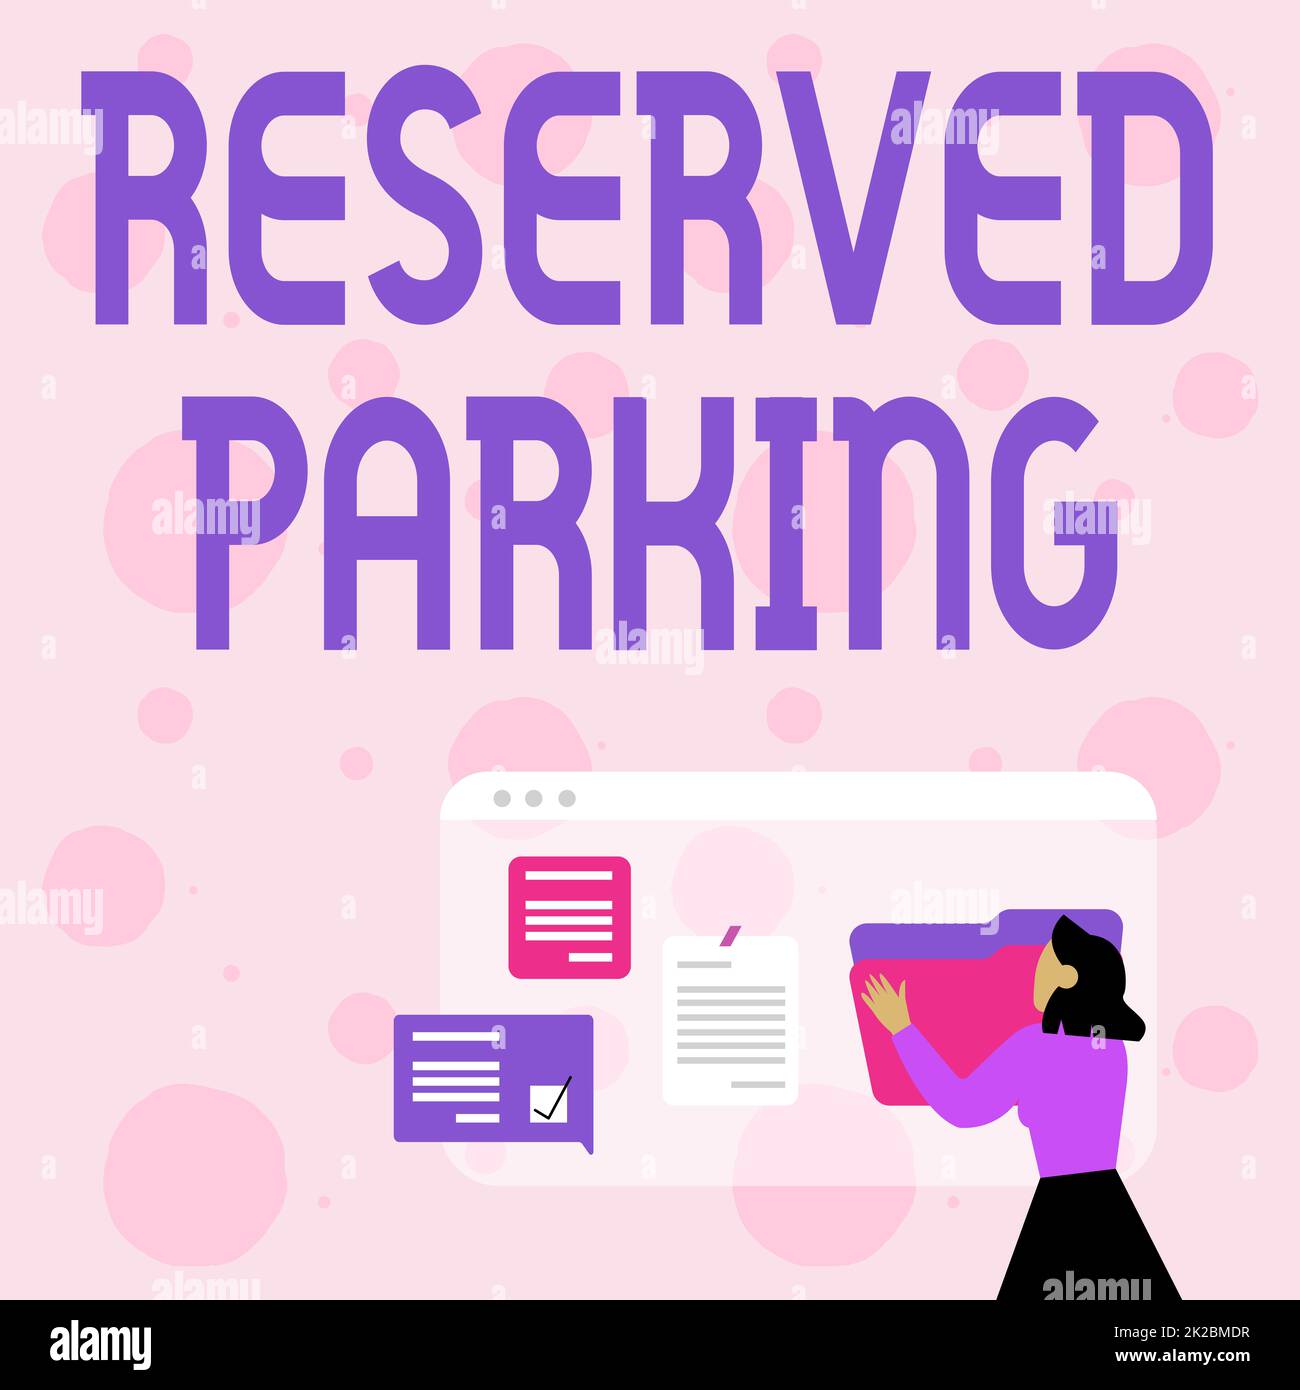 Sign displaying Reserved Parking. Business showcase parking spaces that are reserved for specific individuals Woman Arranging Browser History, Editing Organizing Online Files Stock Photo